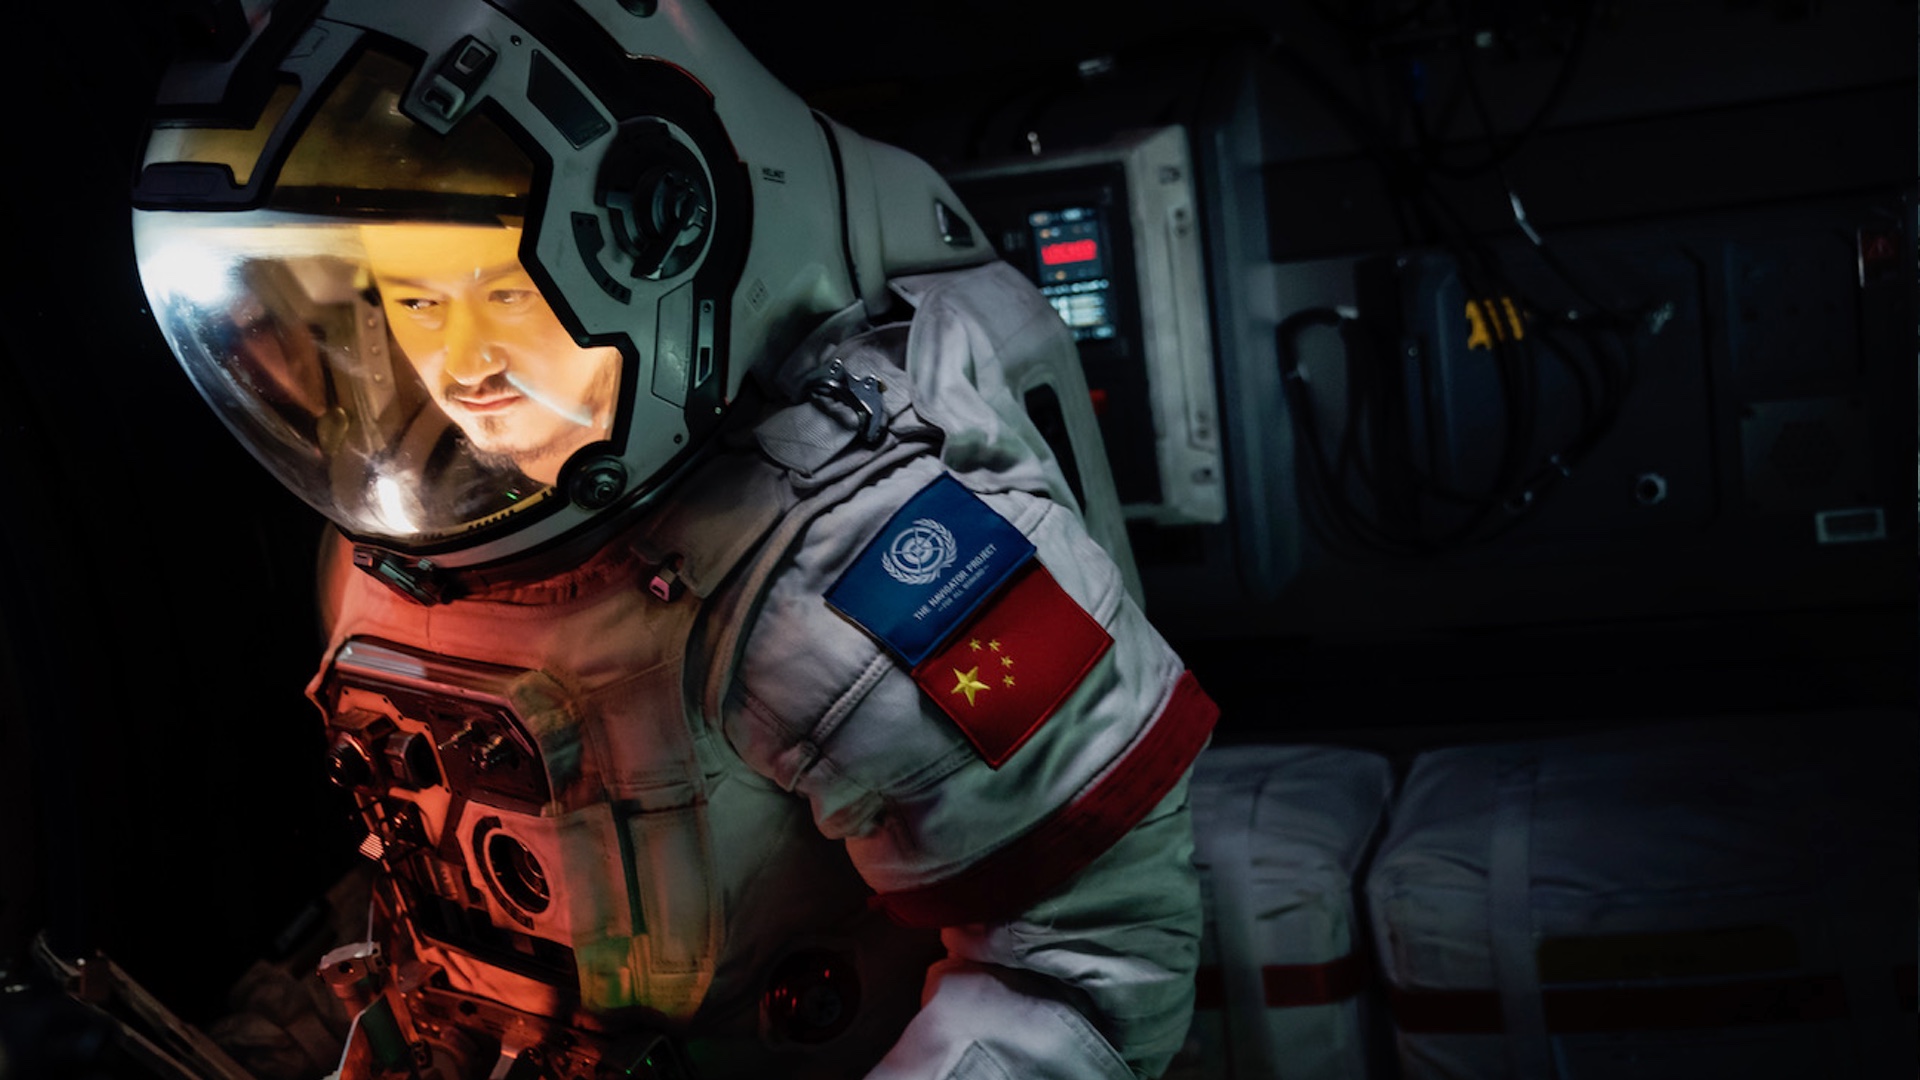 The Wandering Earth Movie Review - 2019 Frant Gwo Film